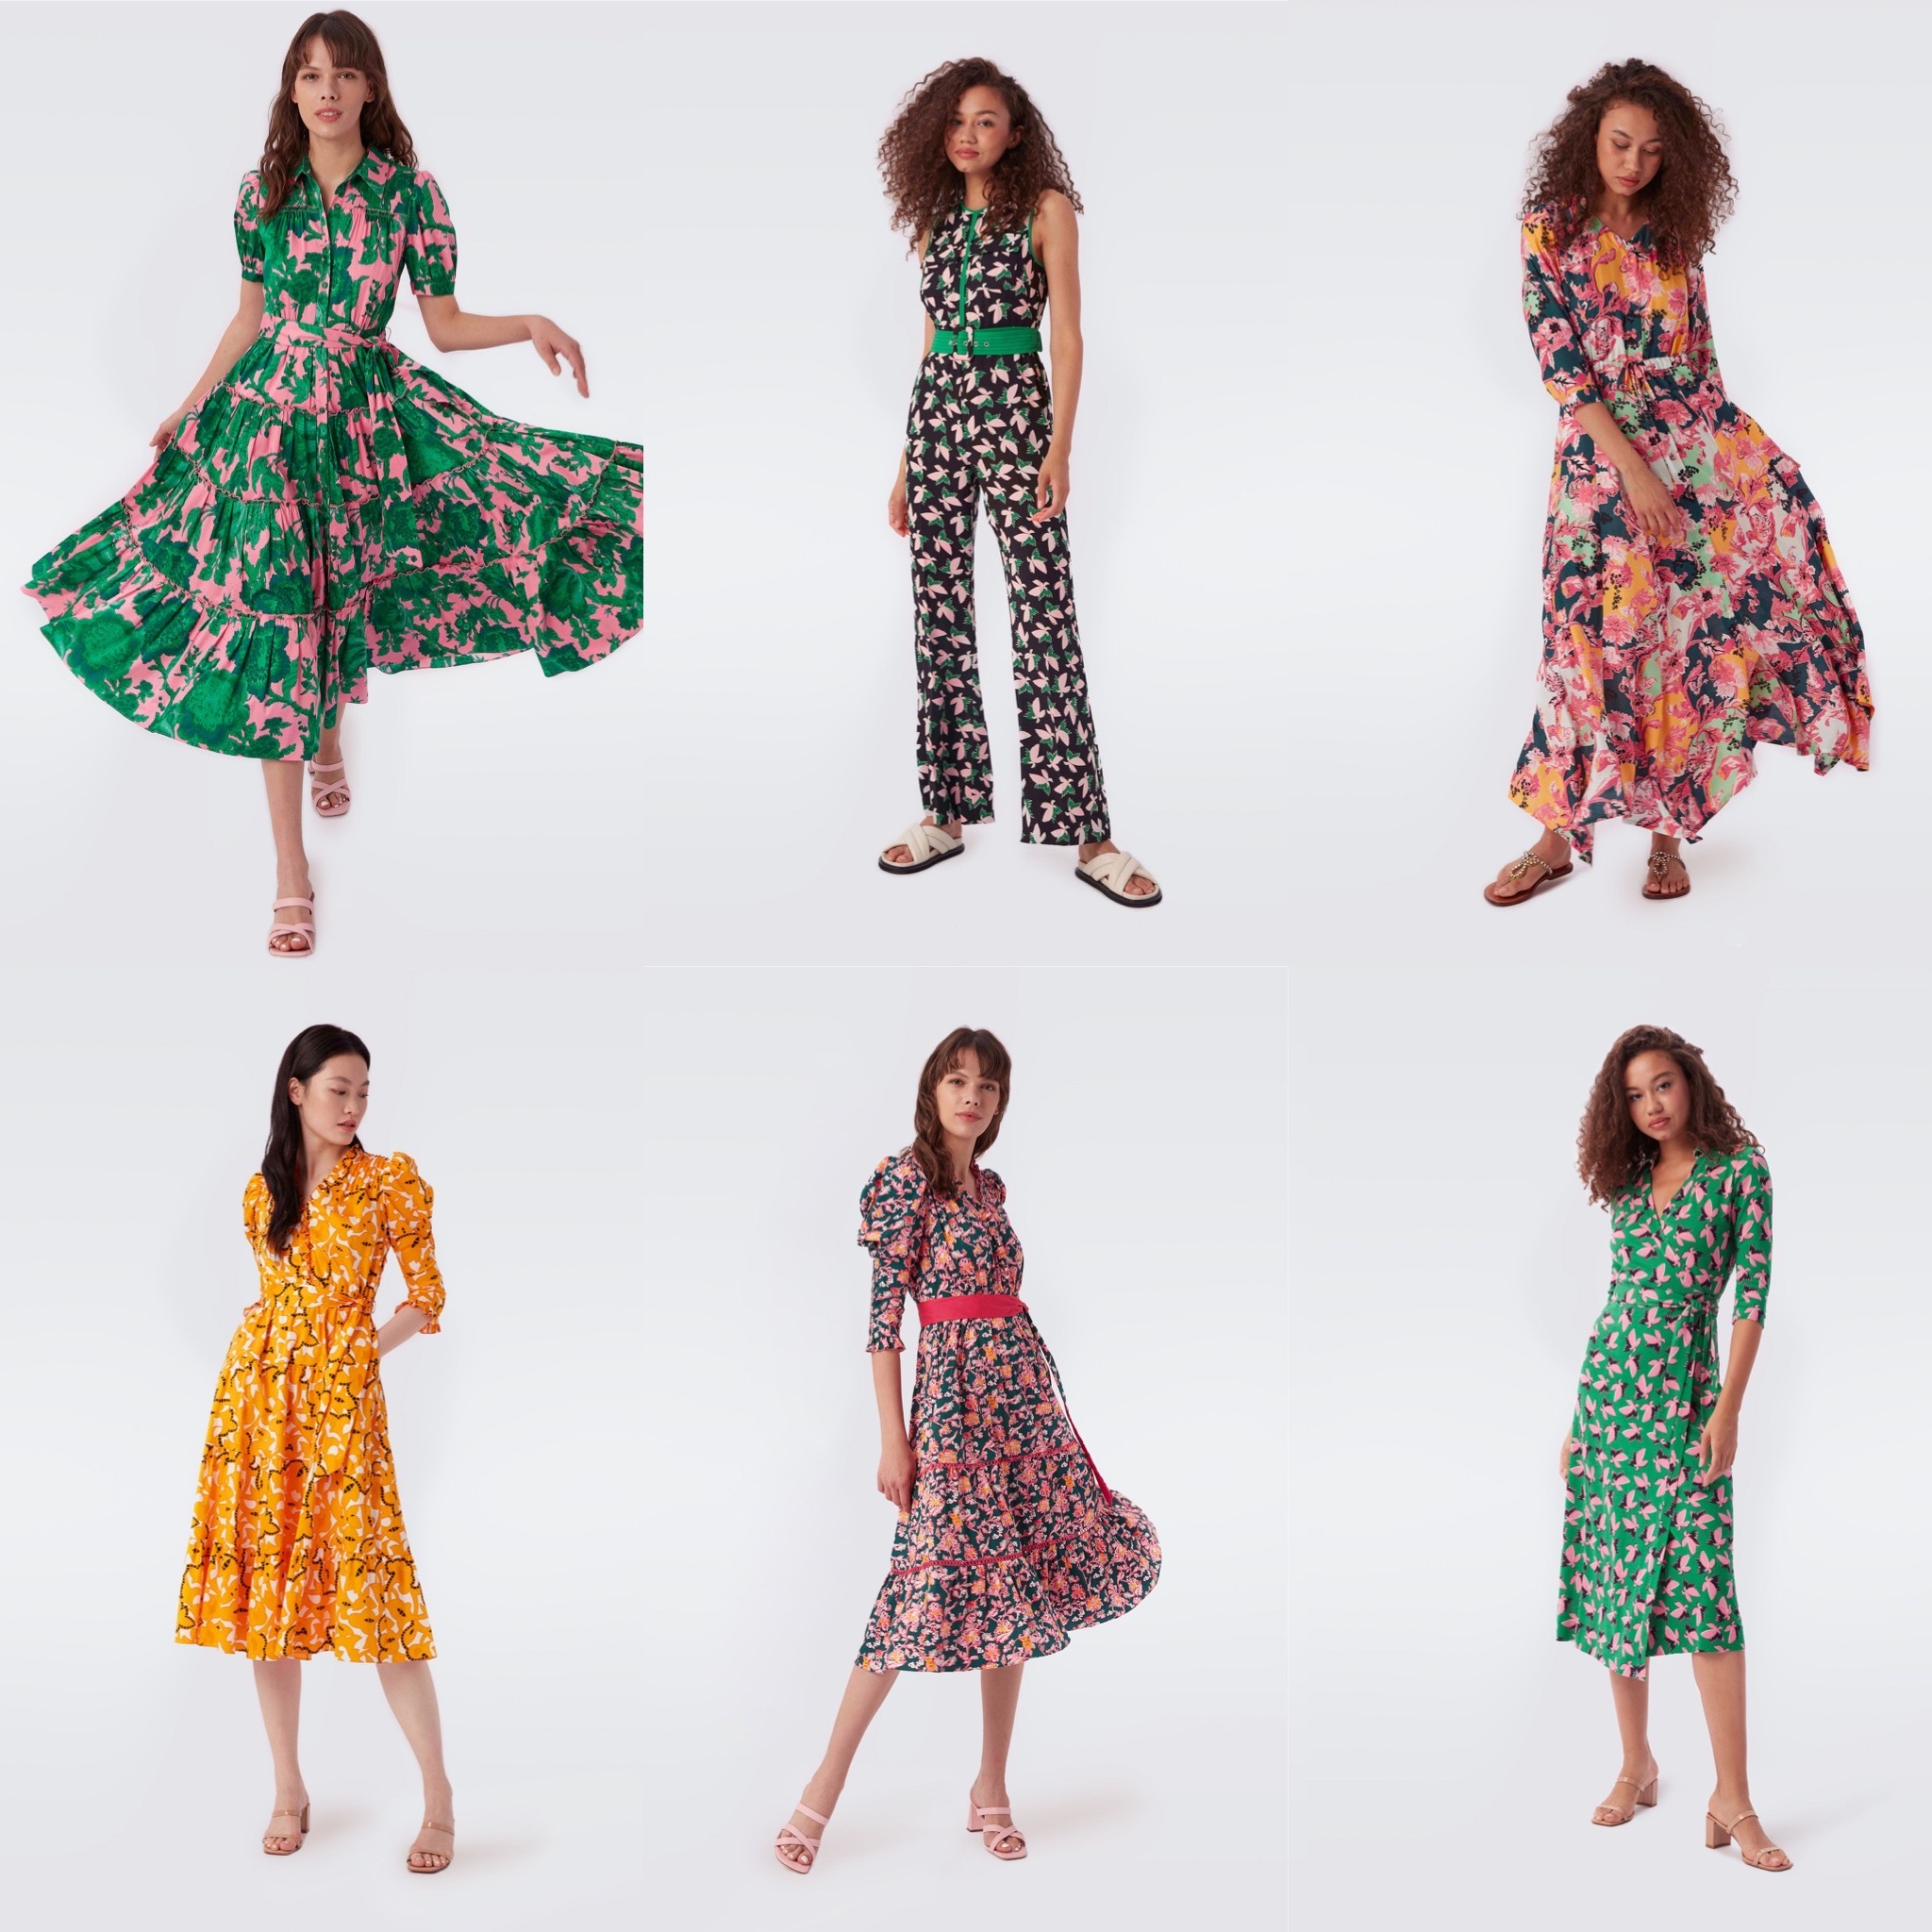 The DVF Spring 2022 Collection